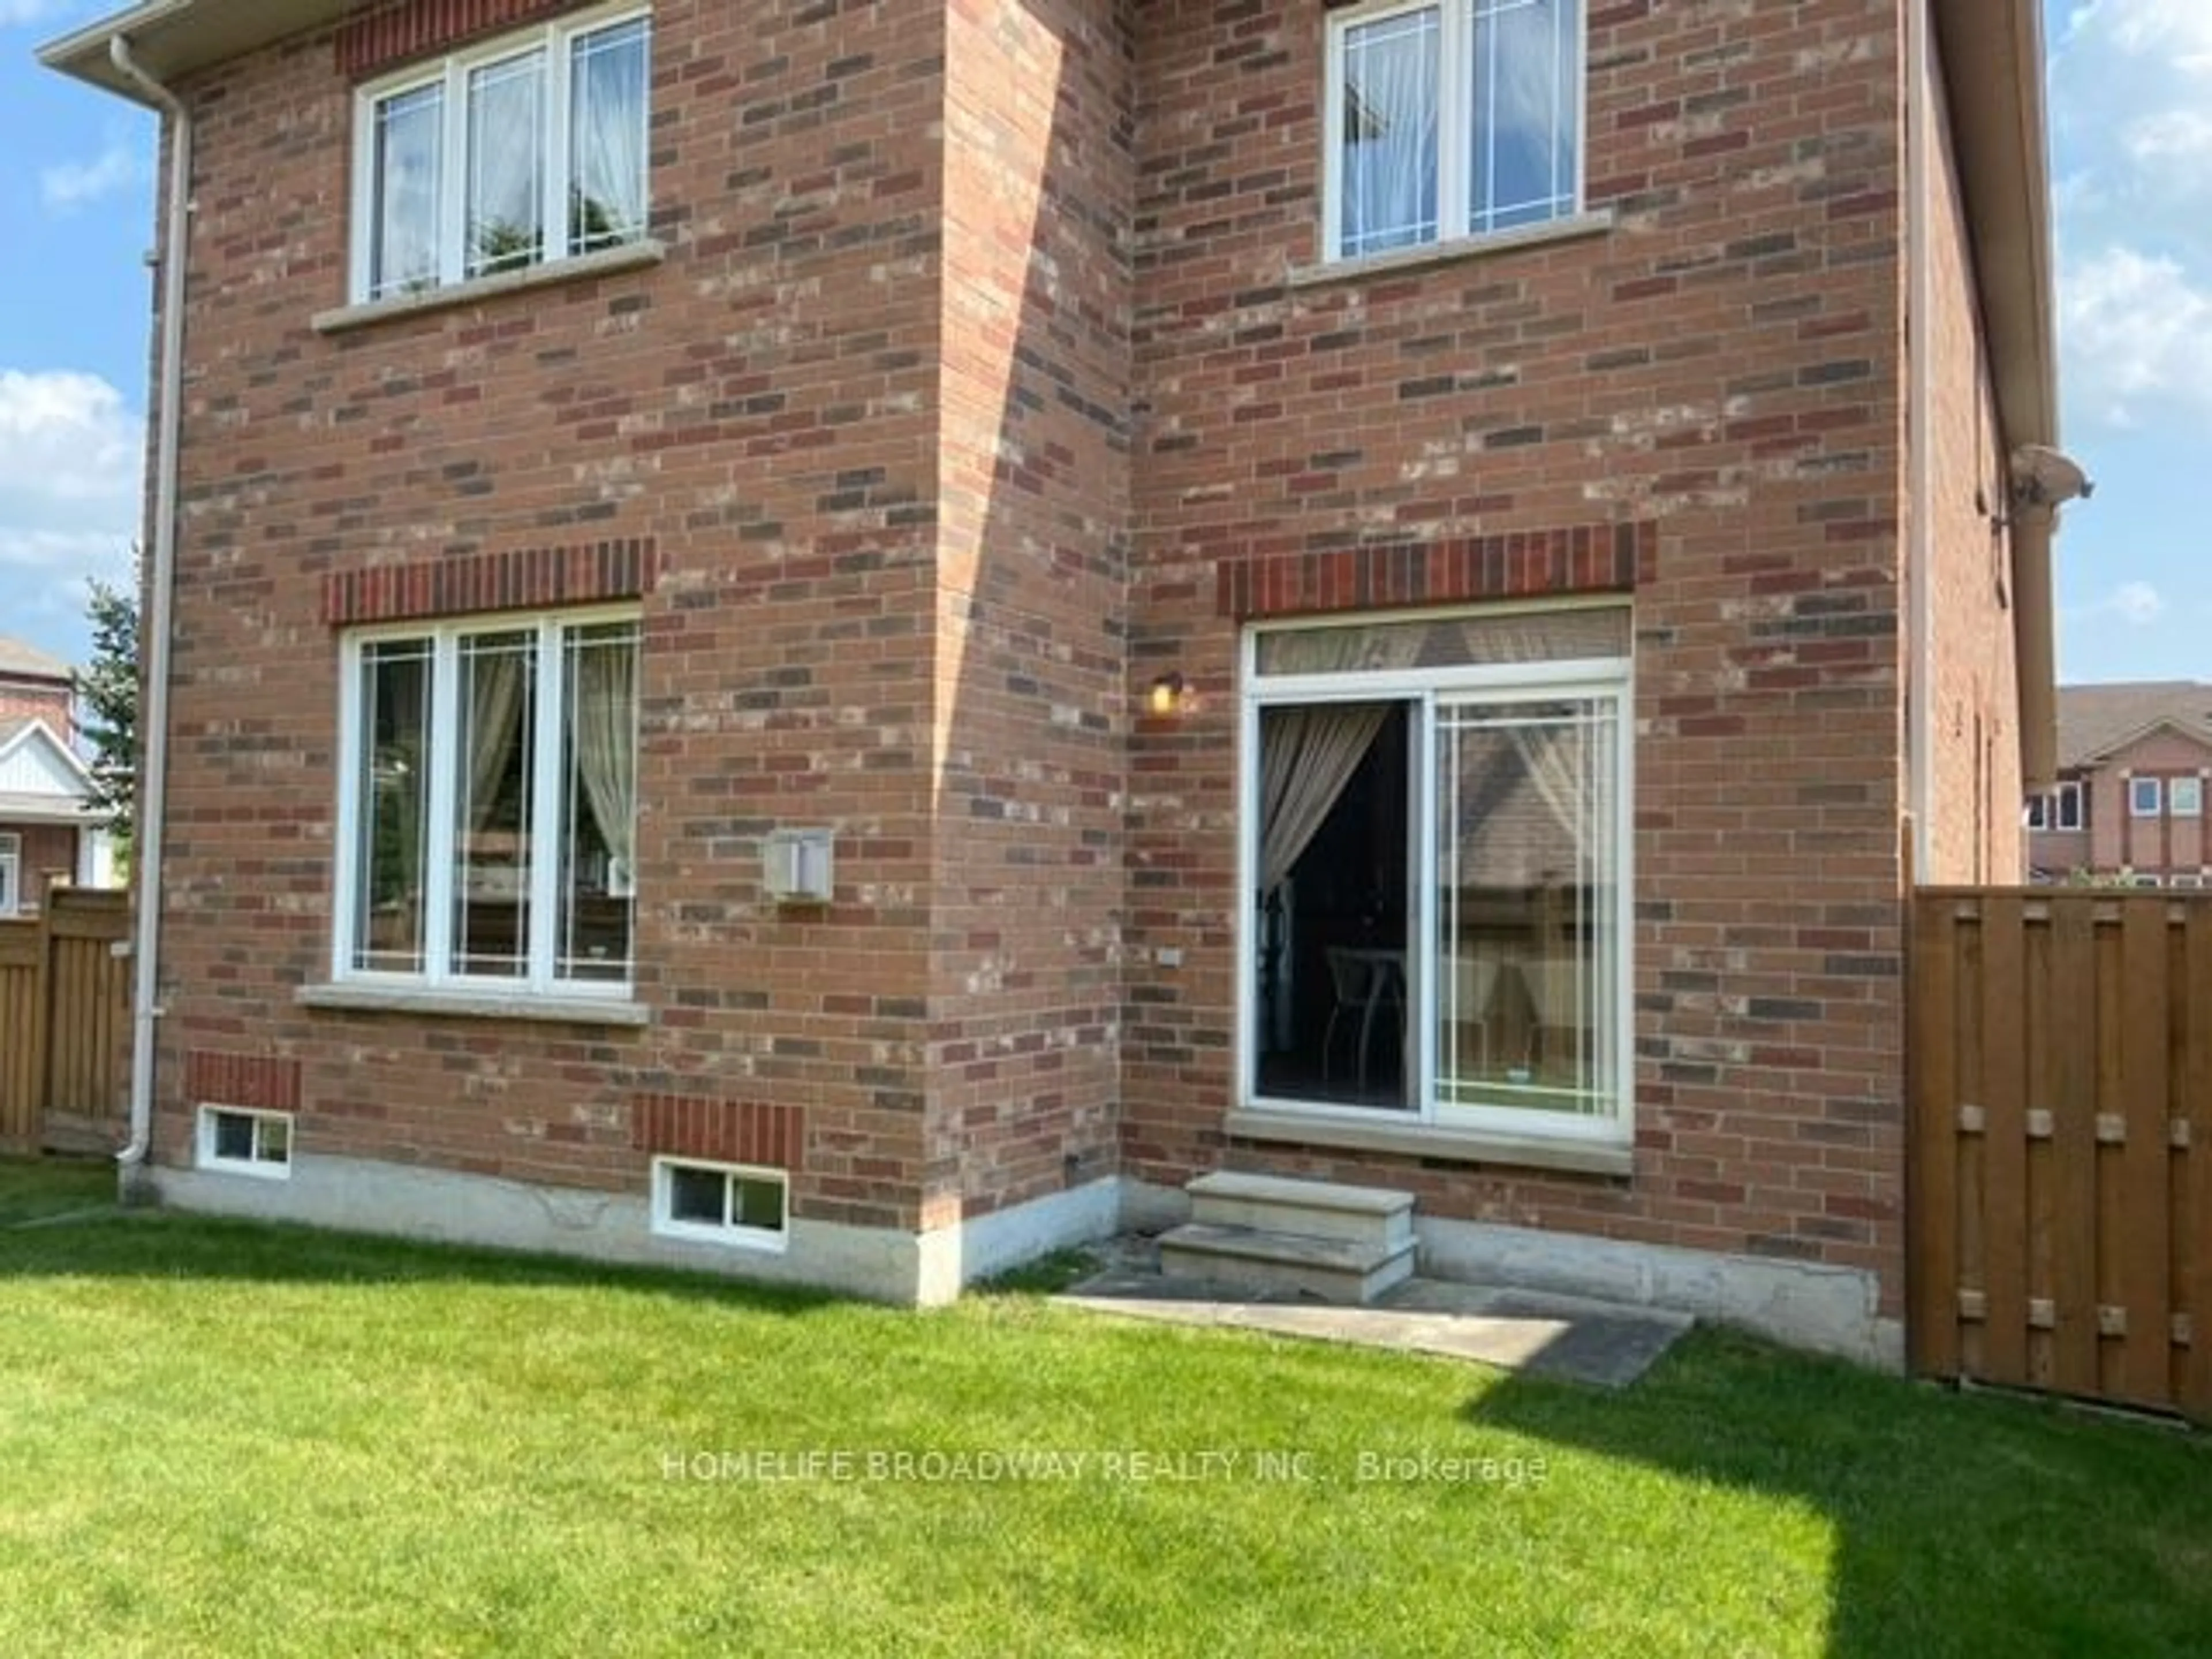 Home with brick exterior material for 202 Bilbrough St, Aurora Ontario L4G 7W7